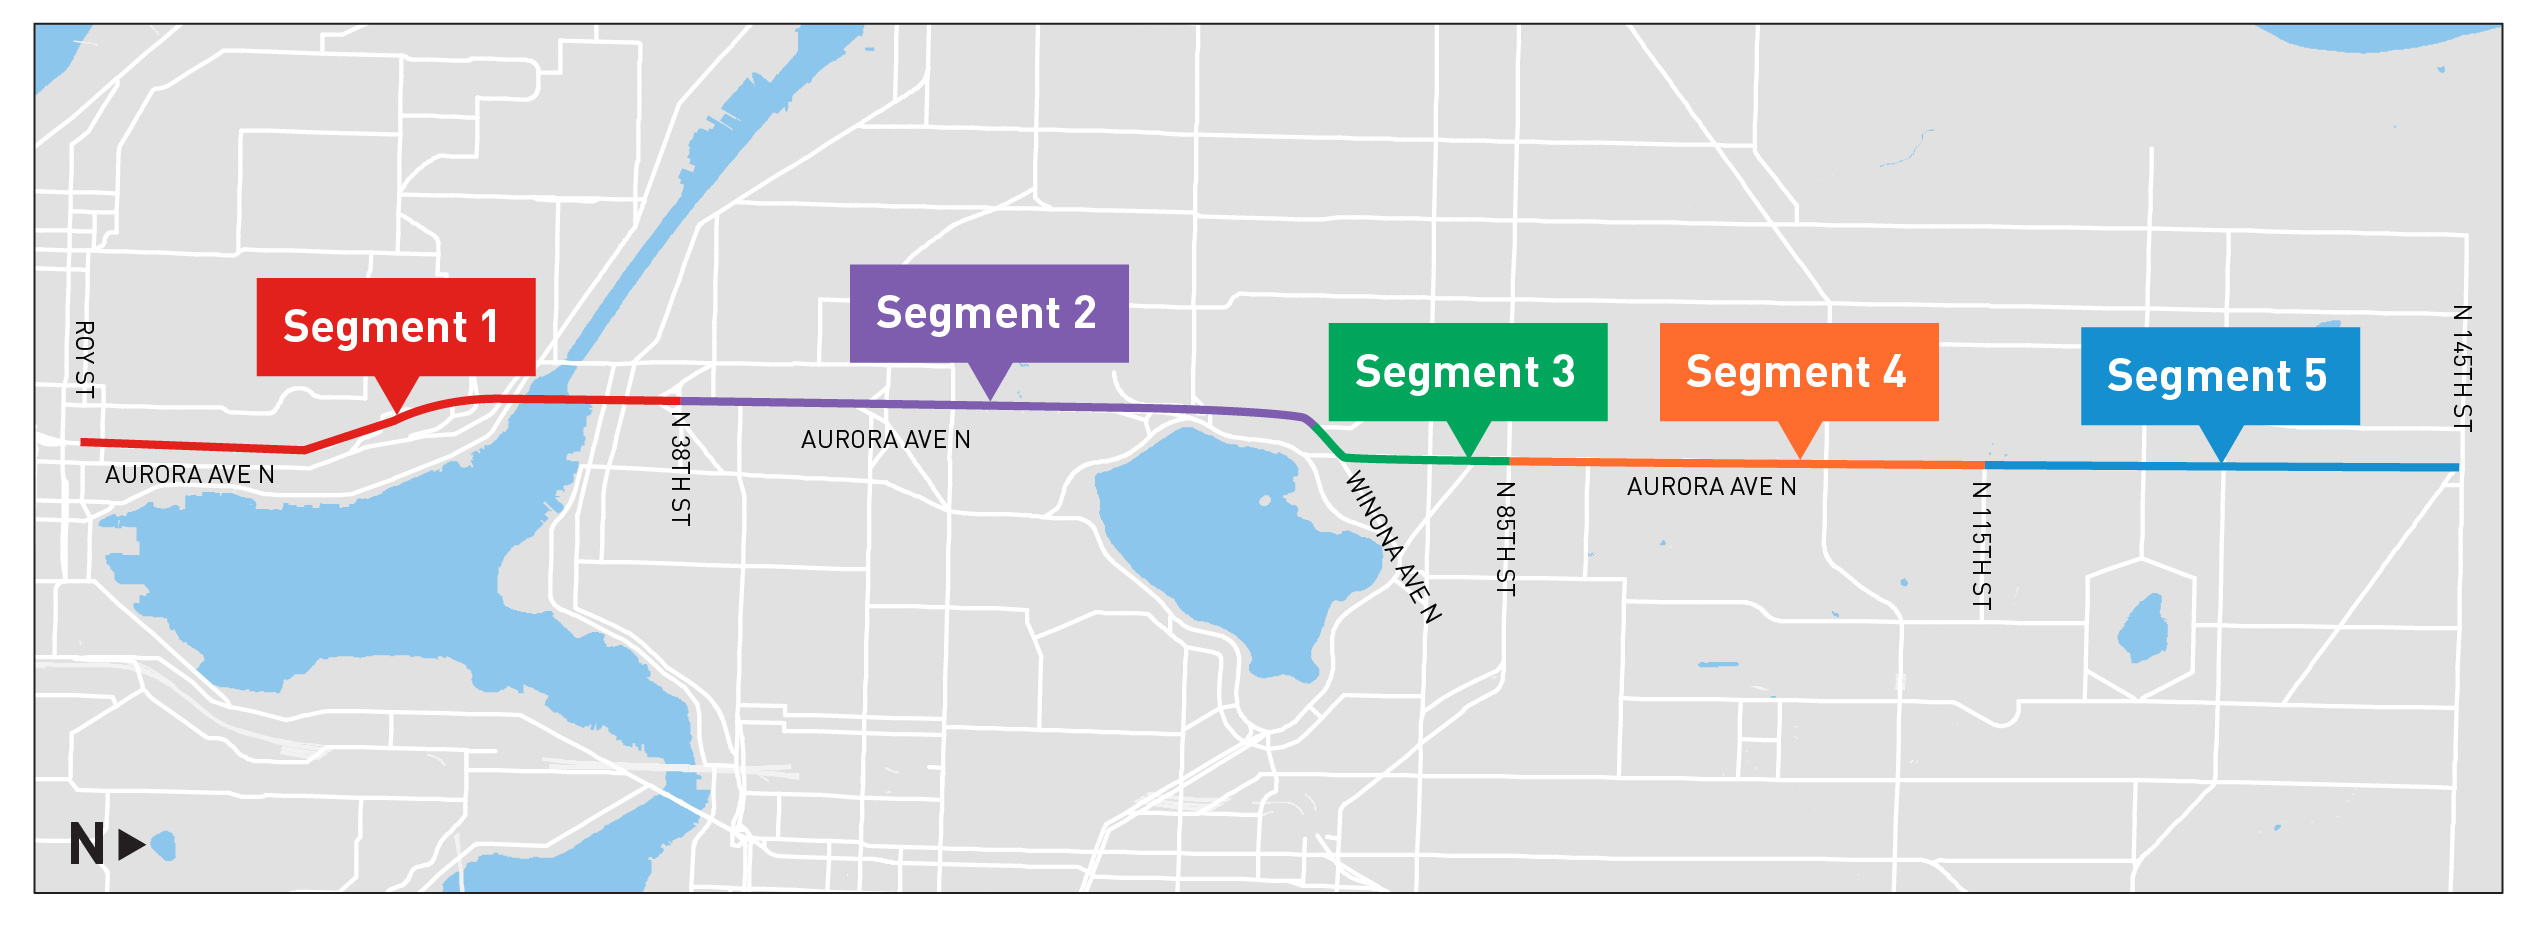 Map of the Aurora Corridor with segments labled Segment 1 to N 38th St, Segment 2 that ends Winona Ave N, Segment 3 that ends at N 85th St, Segment 4 that ends at N115th St, and Segment 5 that ends at N 145th St